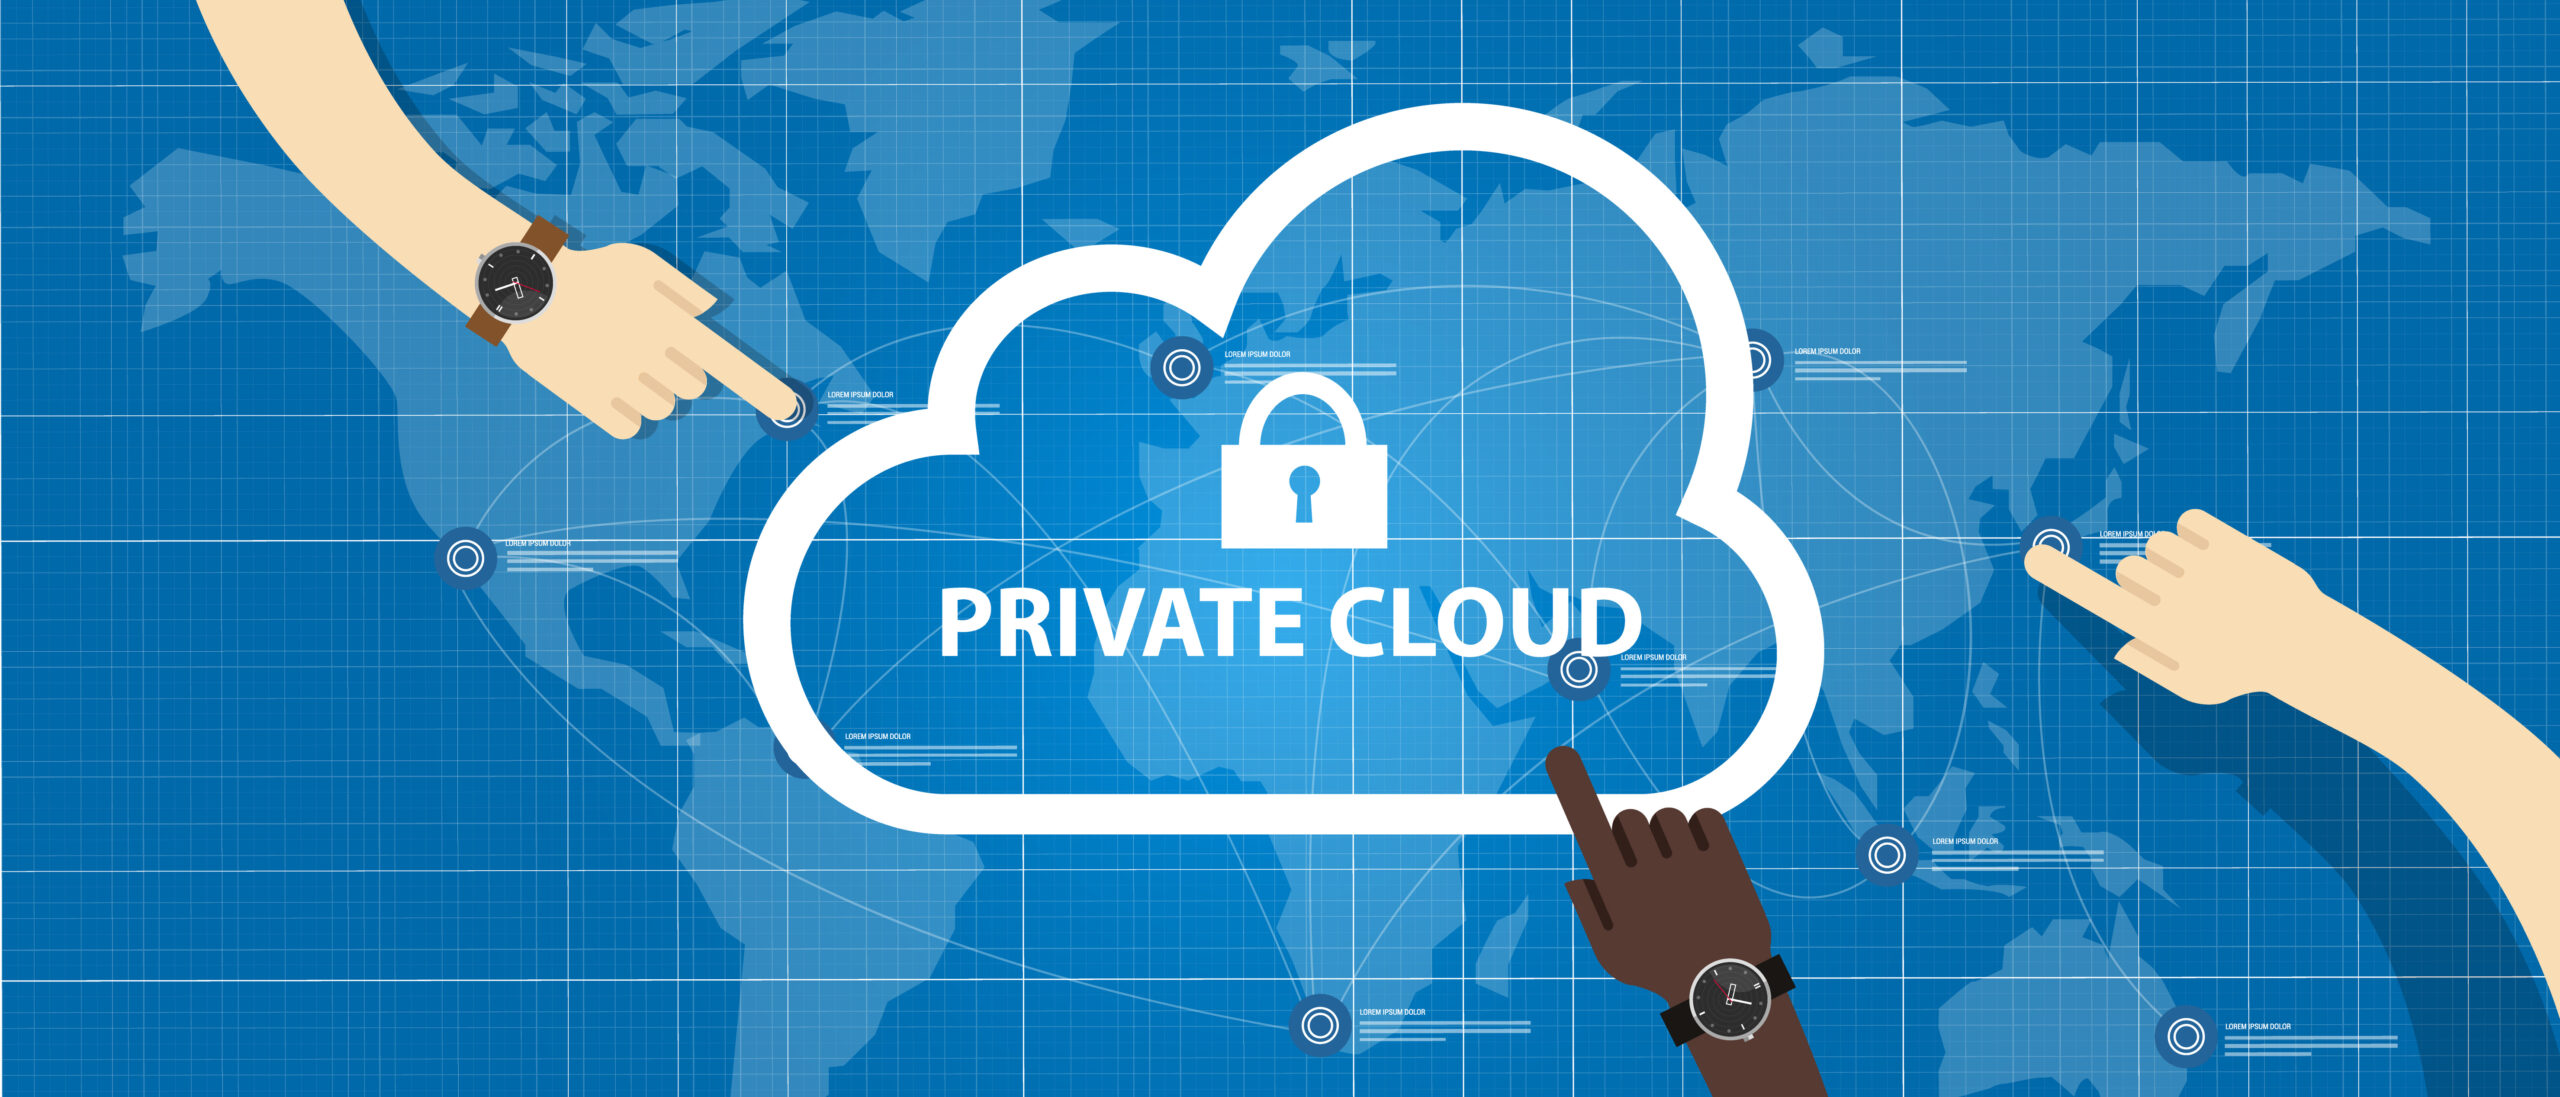 Private-Cloud-Security-World-Map-Access